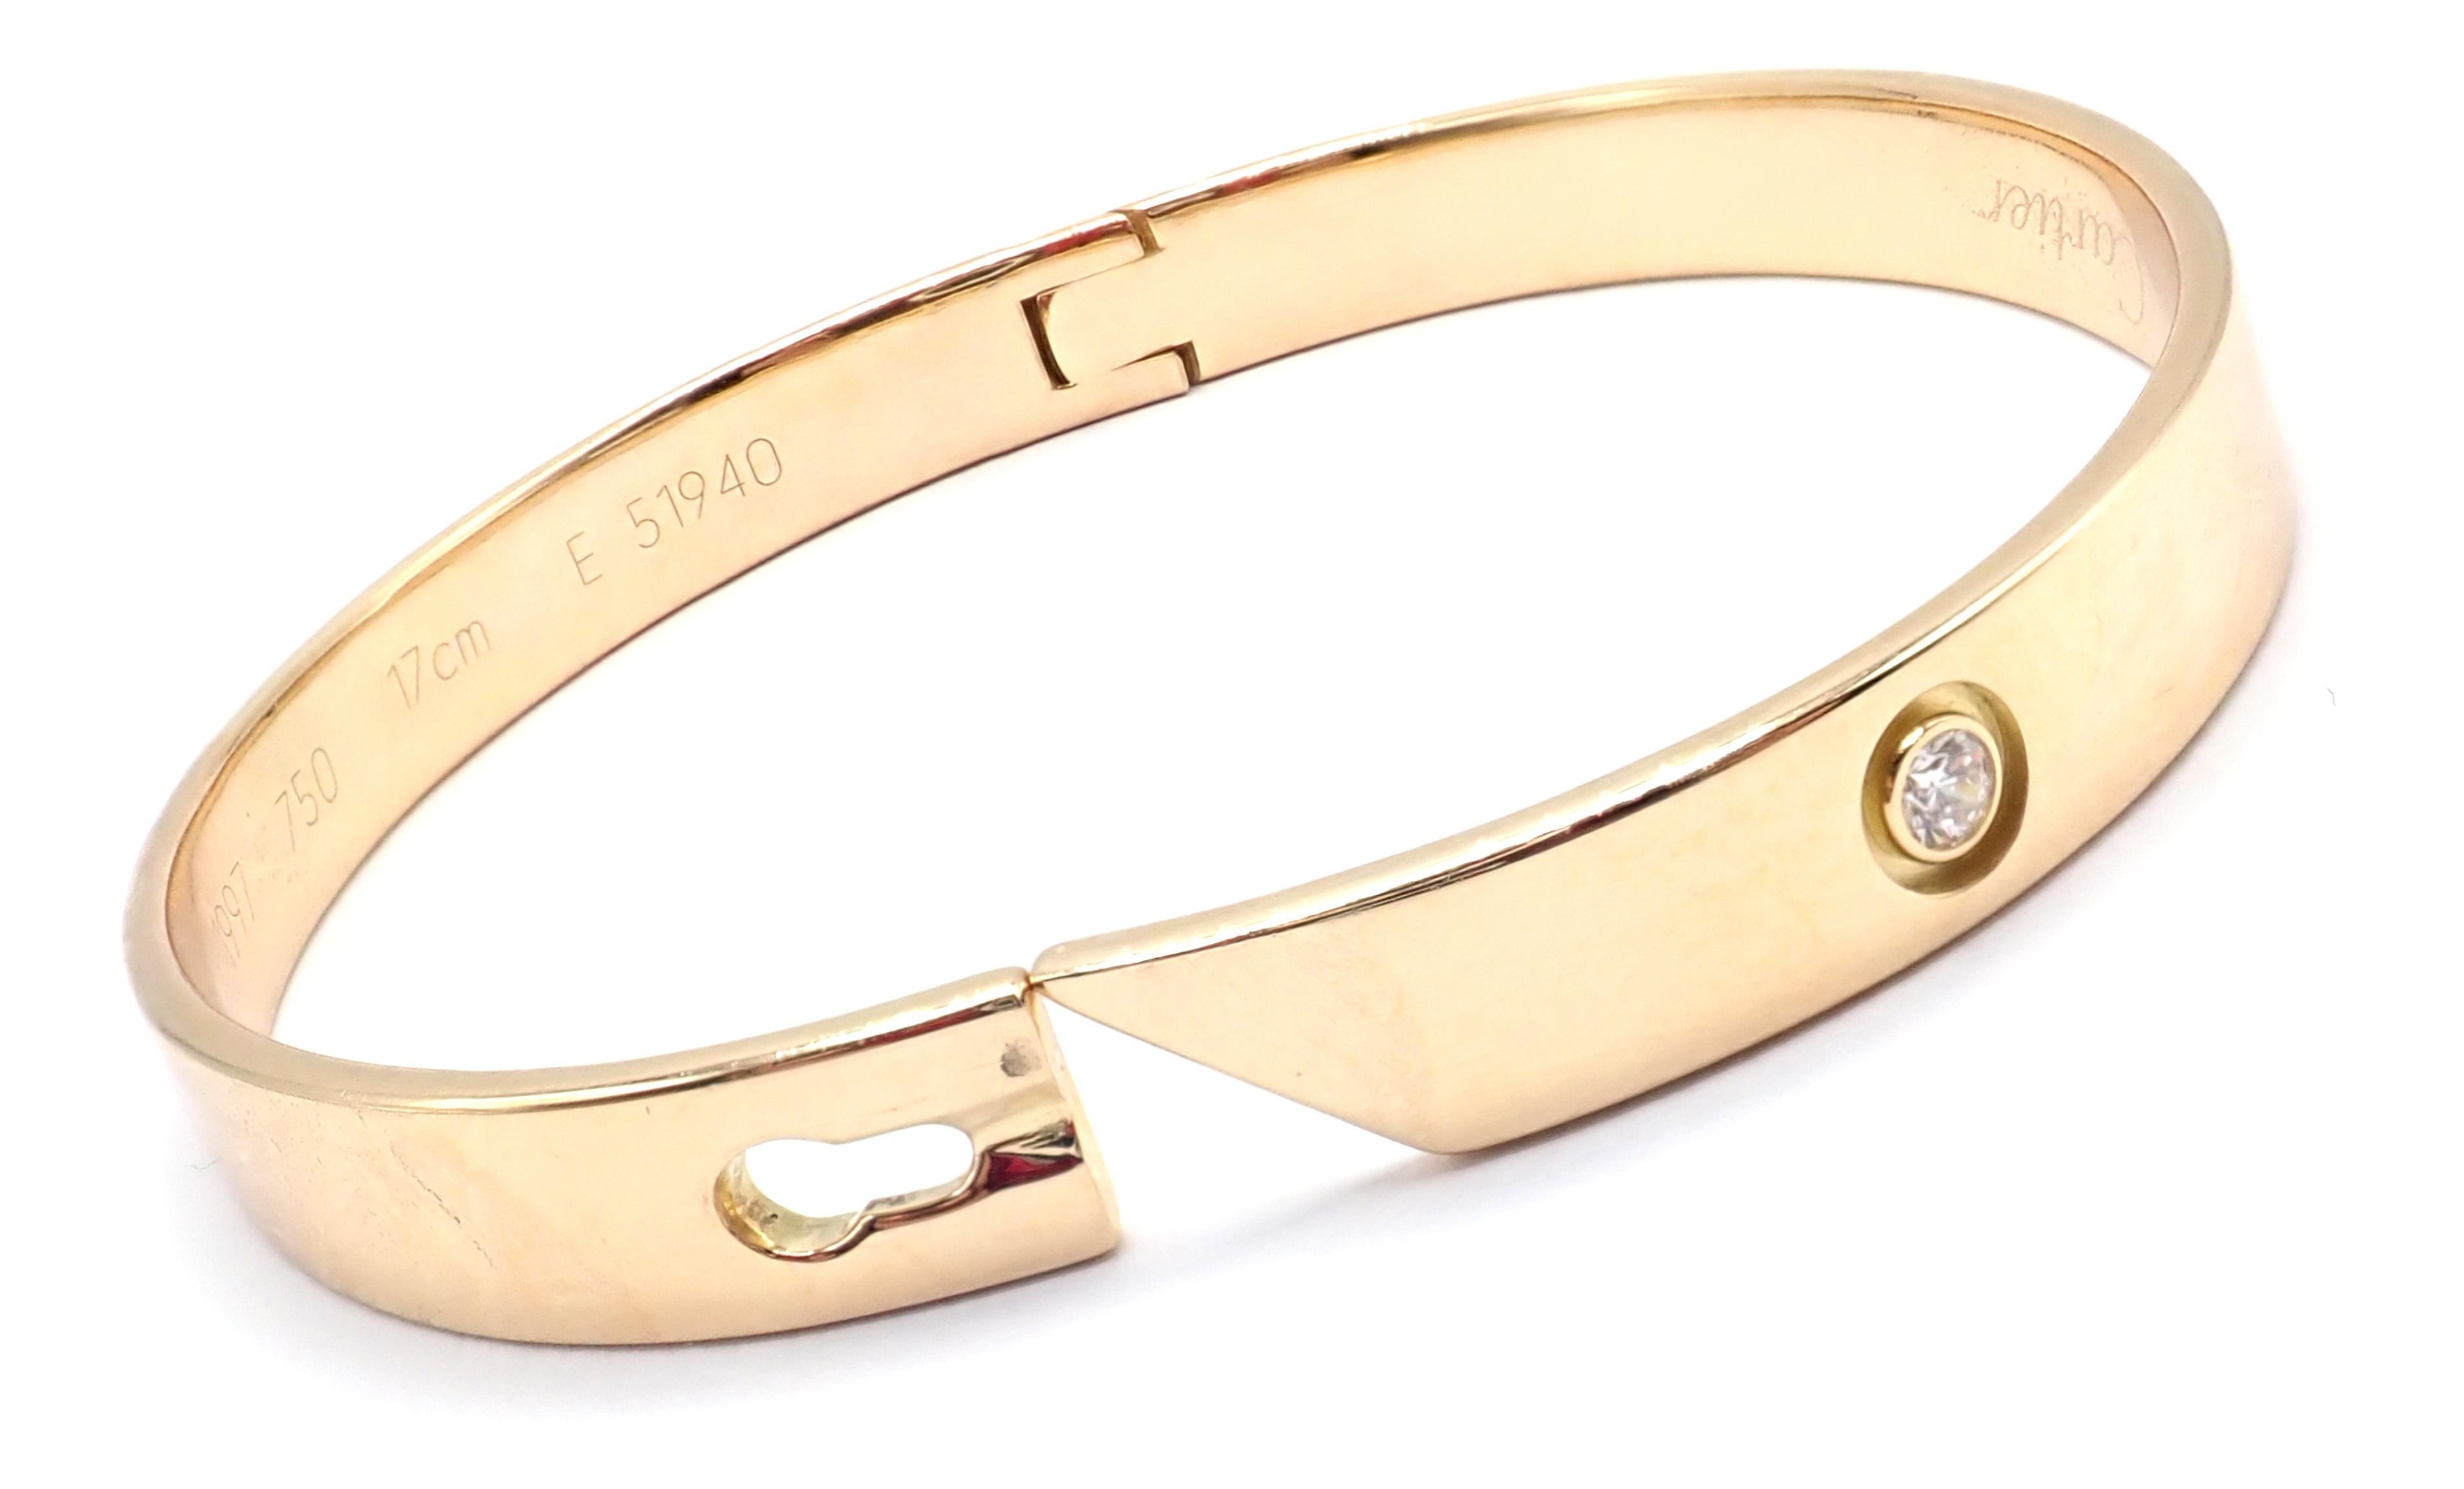 Cartier Diamond Anniversary Yellow Gold Bangle Bracelet Size 17 In Excellent Condition For Sale In Holland, PA